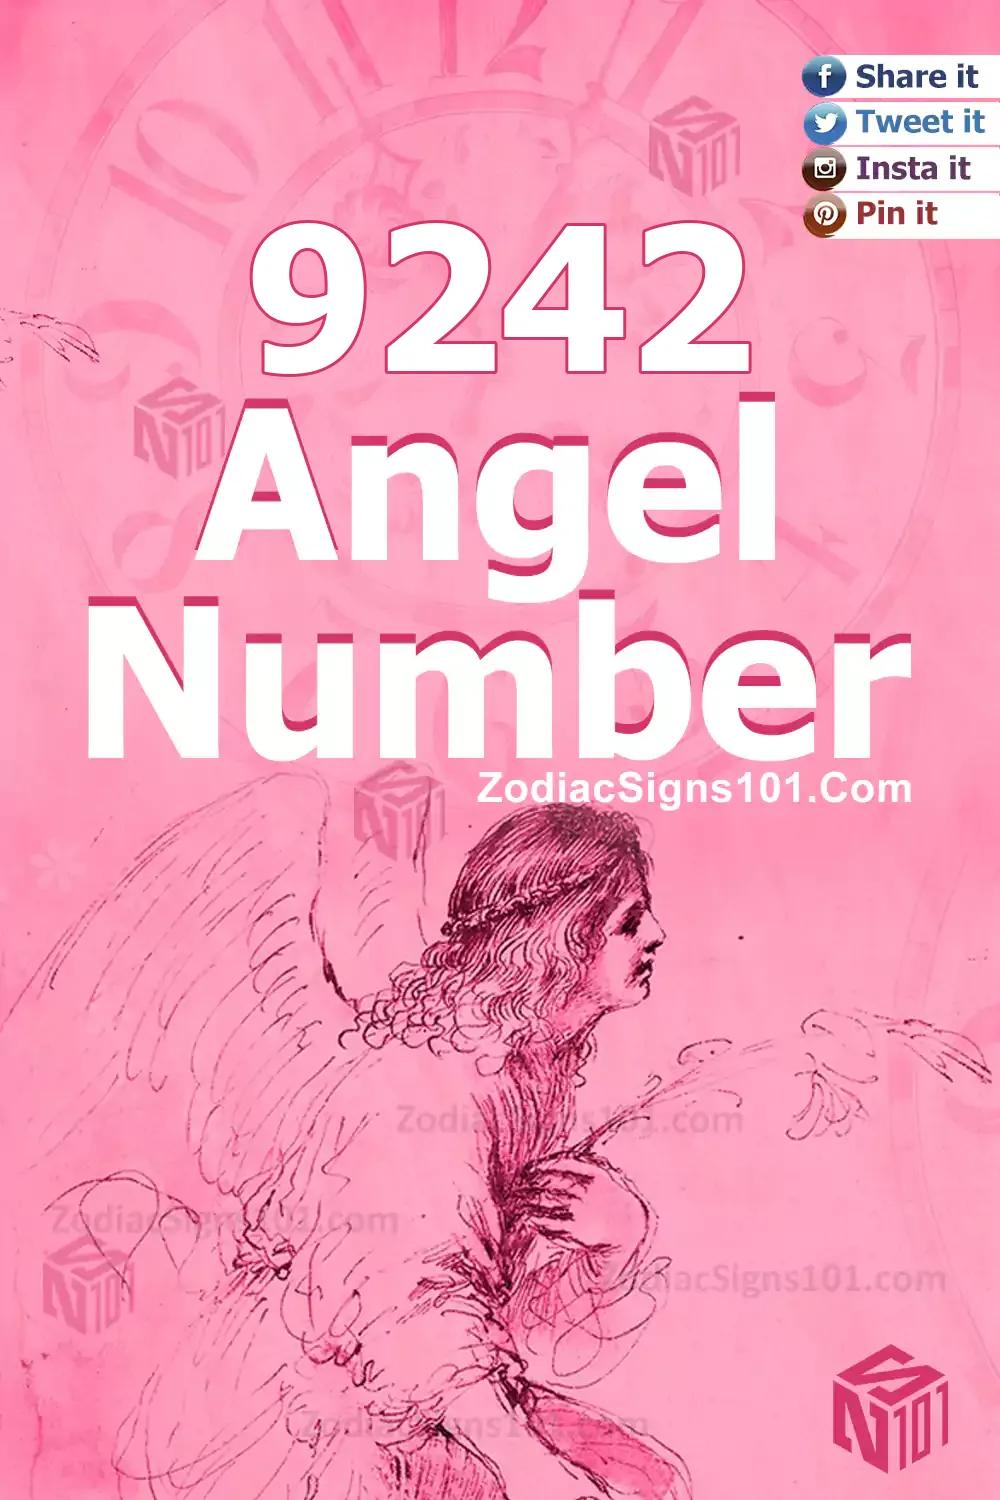 9242 Angel Number Meaning